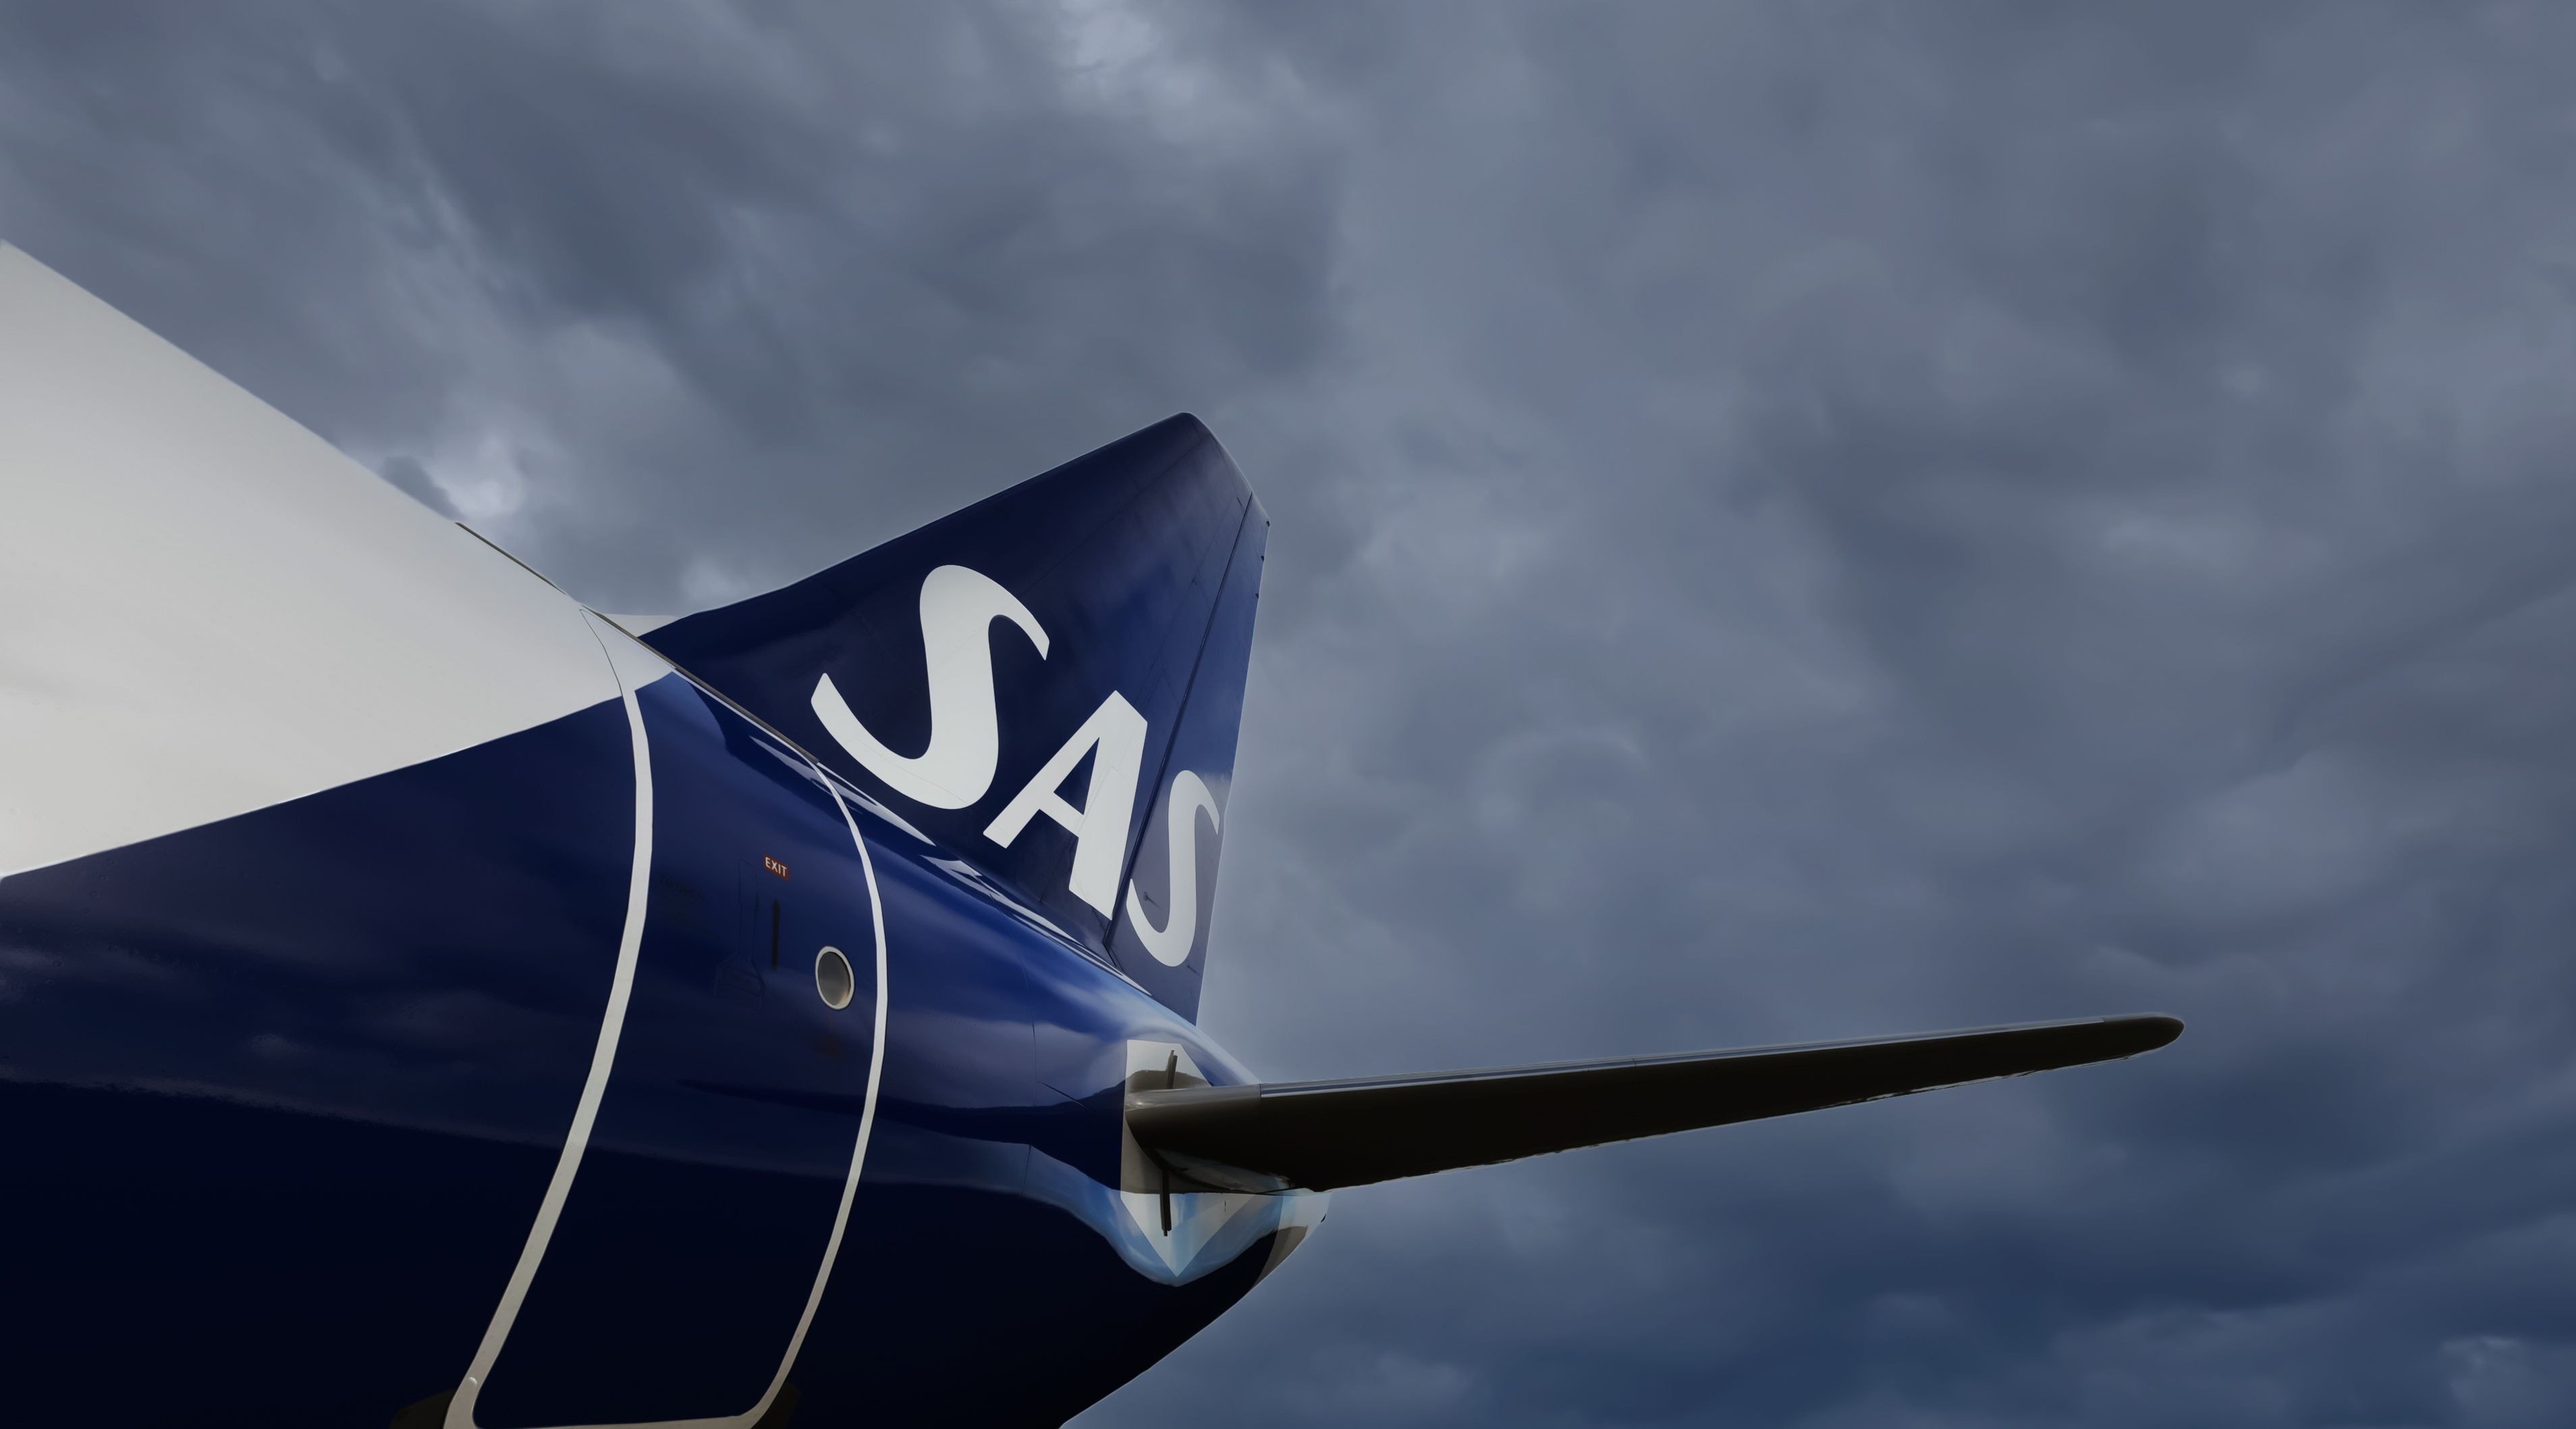 shutterstock_2200636453 - Copenhagen, Denmark - Sep. 10th 2022: Tail of a jet airliner with the SAS logo or Scandinavian Airlines. Dark grey clouds in the background.